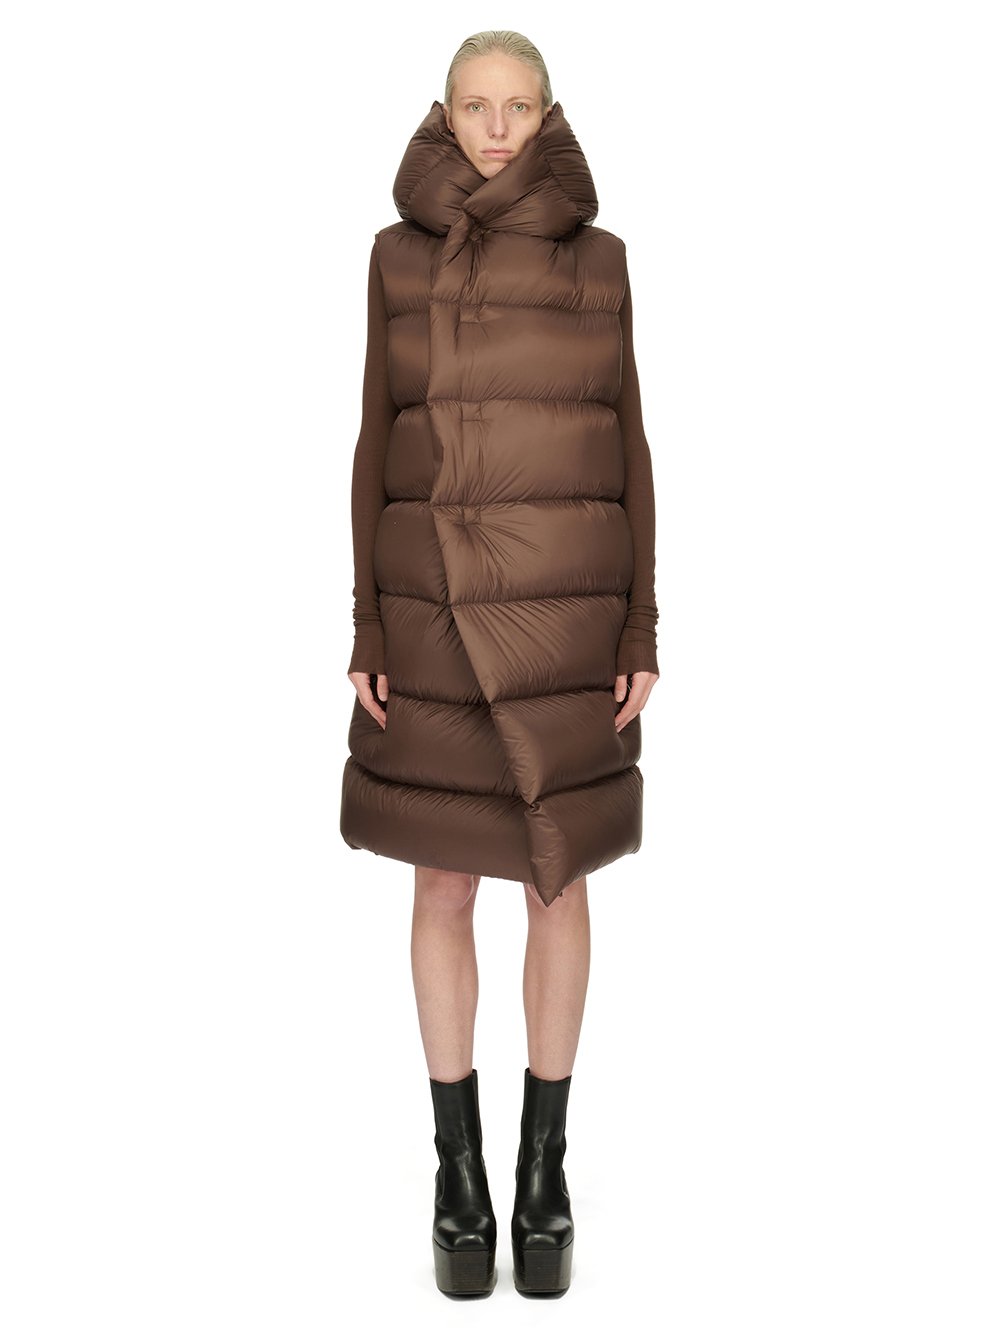 RICK OWENS FW23 LUXOR HOODED LINER IN BROWN RECYCLED NYLON